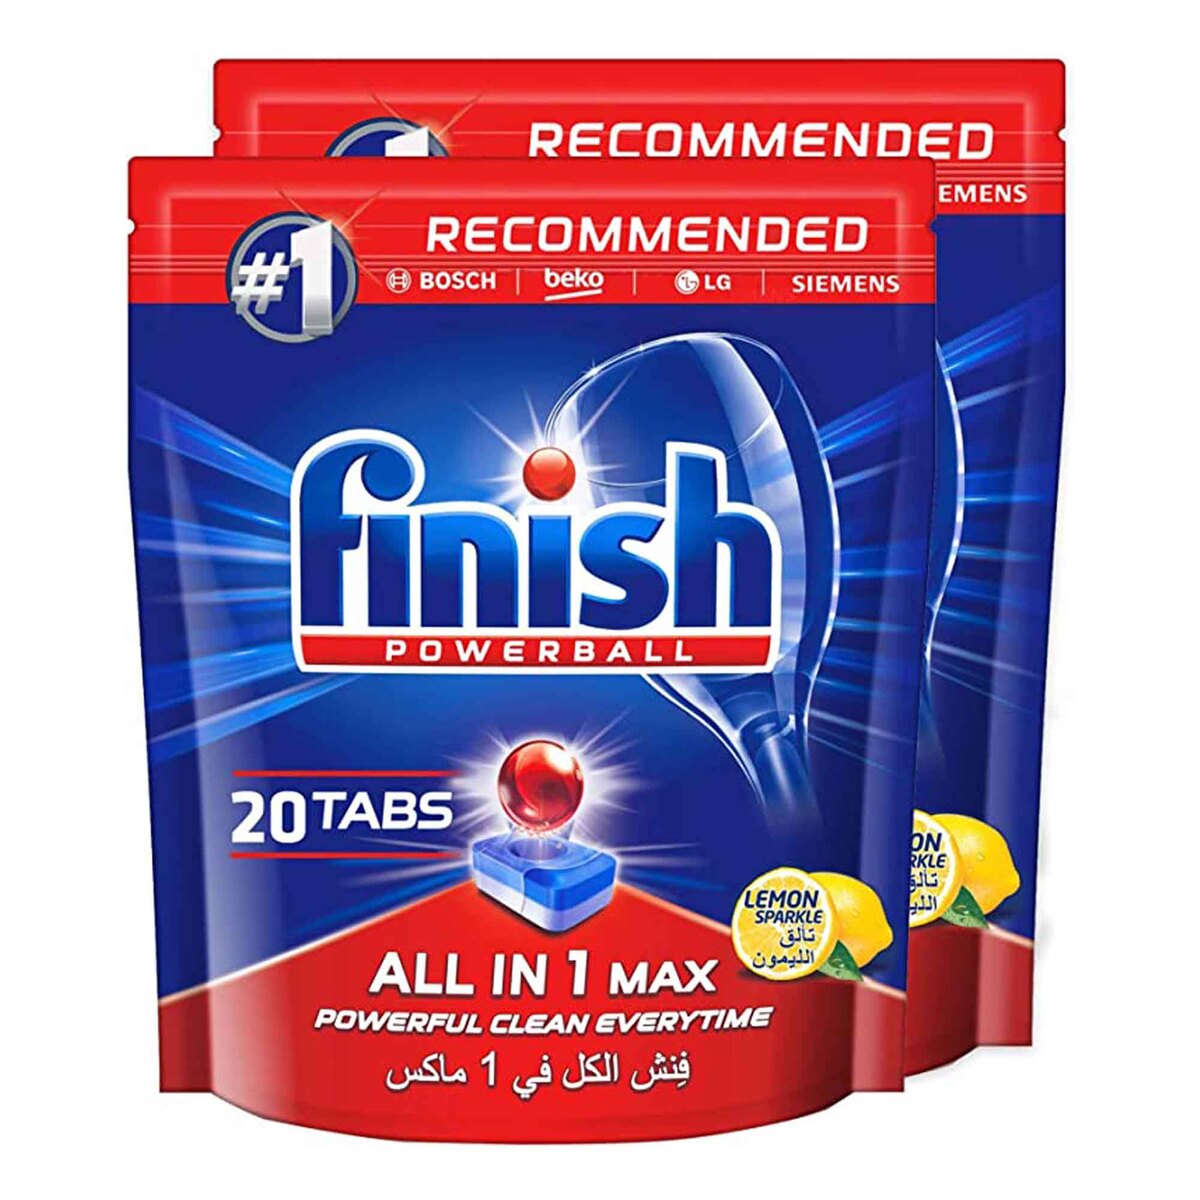 Finish Powerball All In 1 Max Lemon Sparkle Tabs 2 x 20 pcs